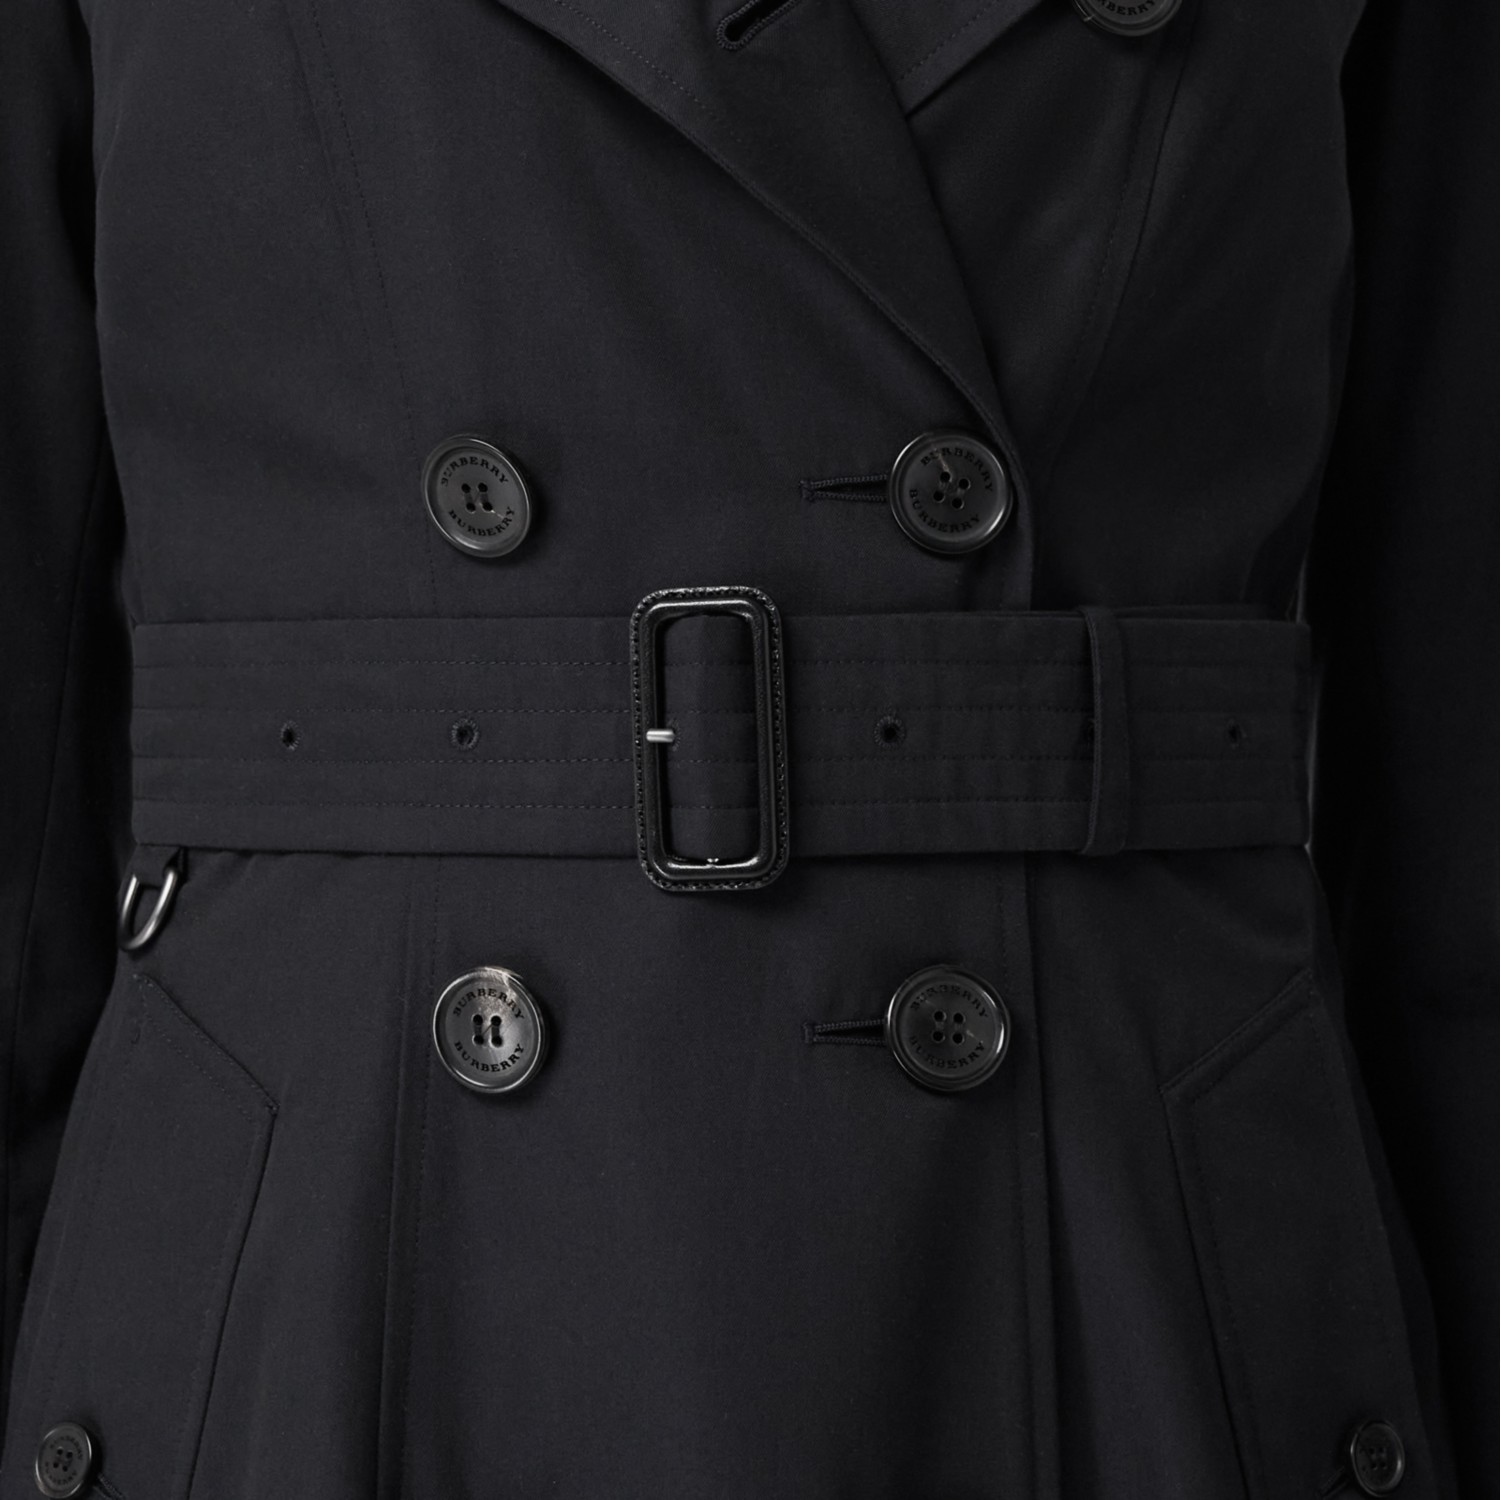 Burberry The Long Chelsea Heritage Trench Coat